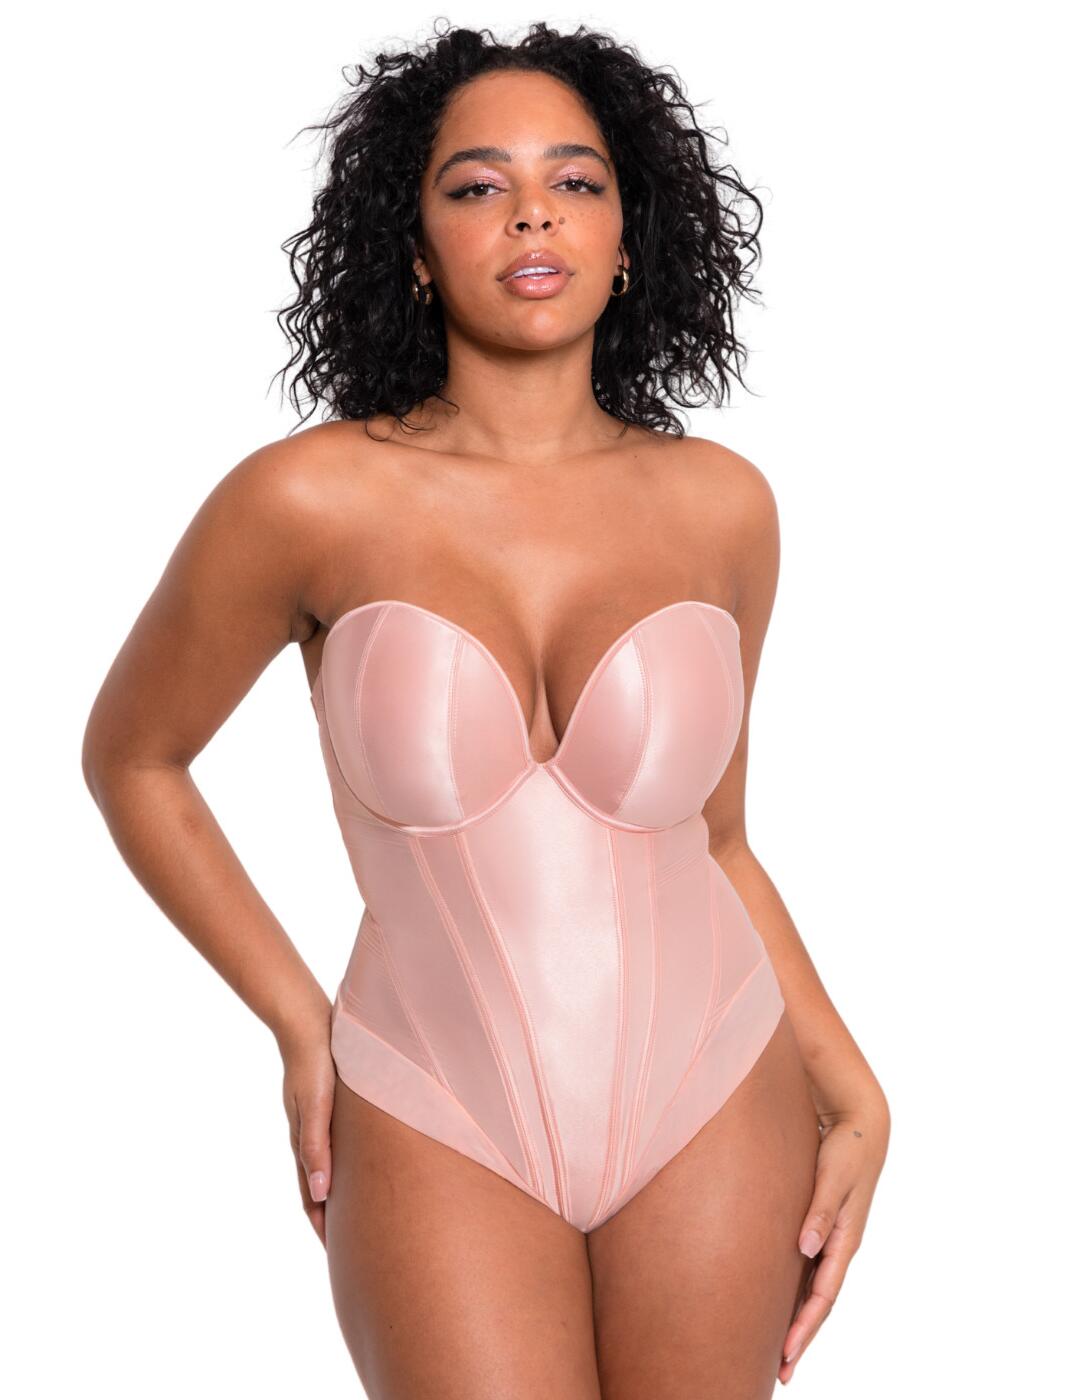 ST035704 Scantilly by Curvy Kate Classique Plunge Strapless Bodysuit -  ST035704 Powdery Pink